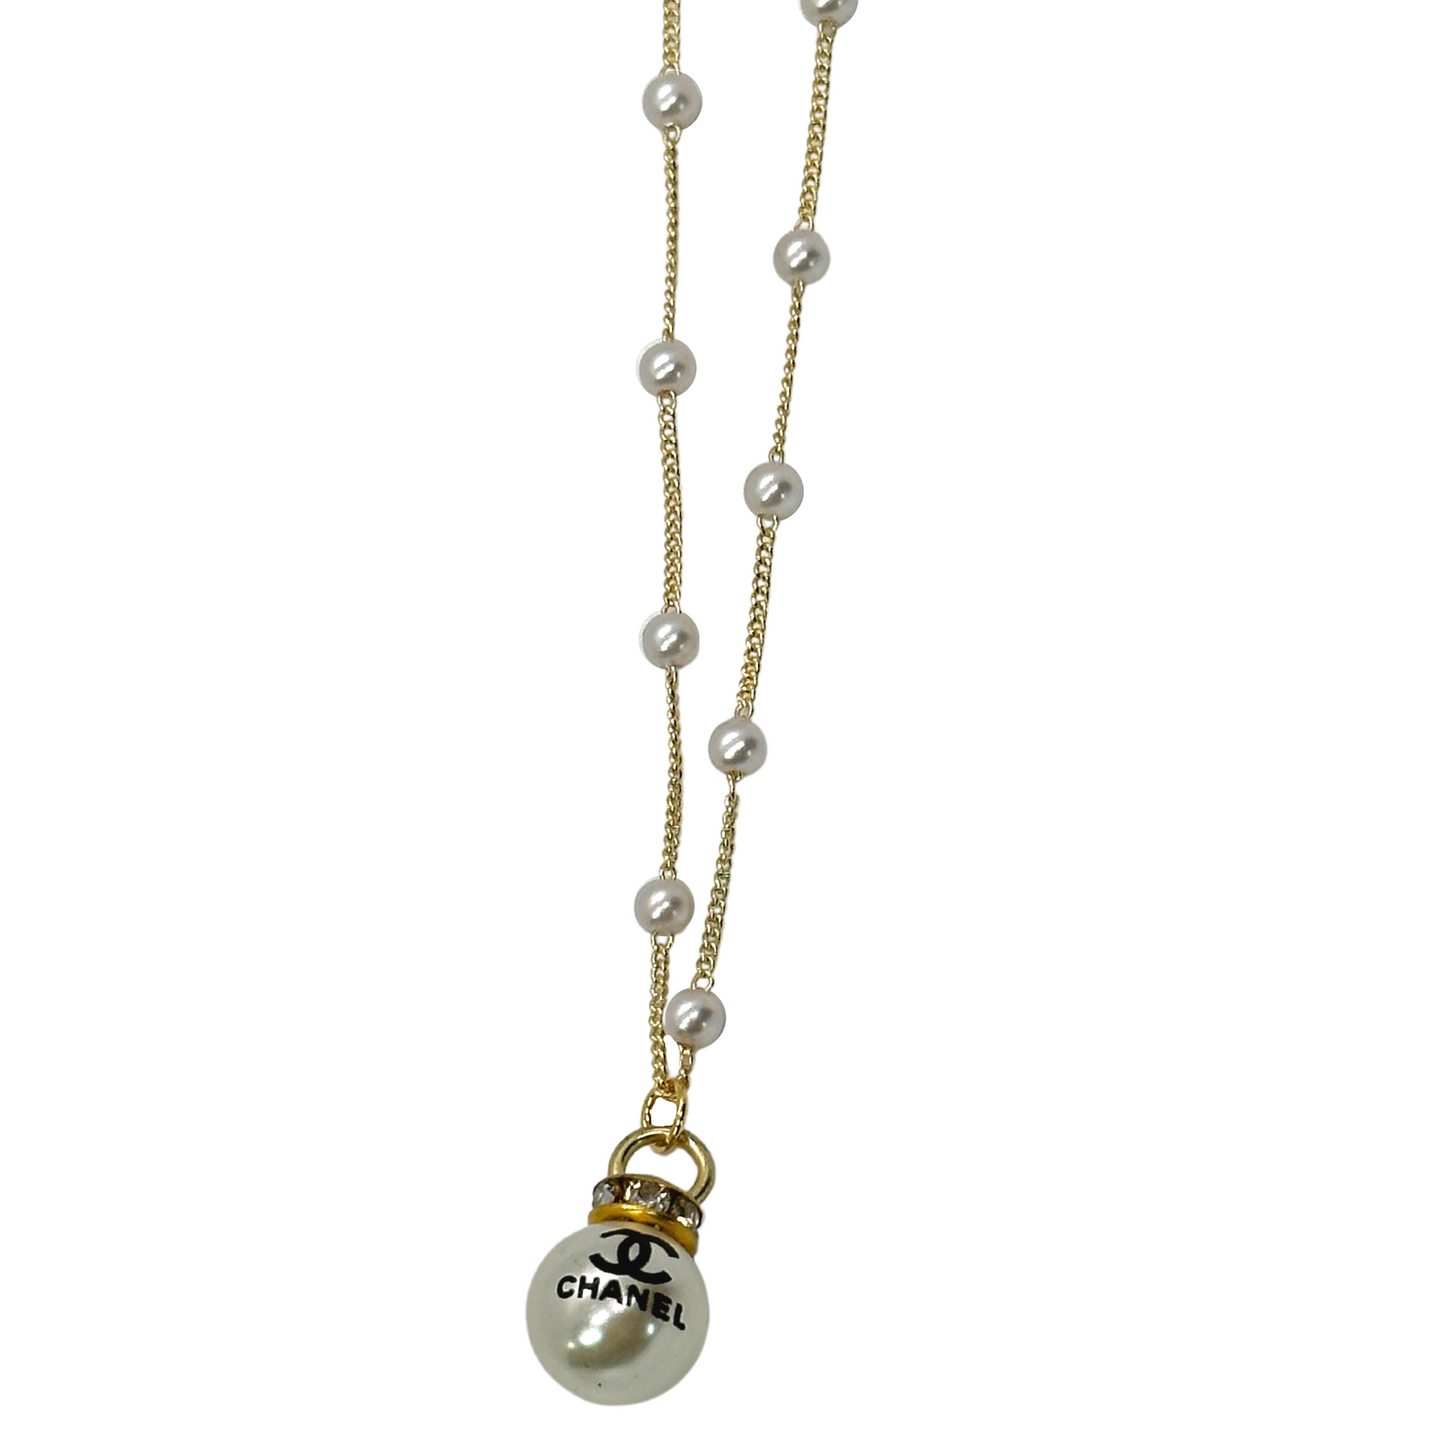 Authentic Chanel Faux Pearl Charm | Reworked Gold 16-18" Necklace